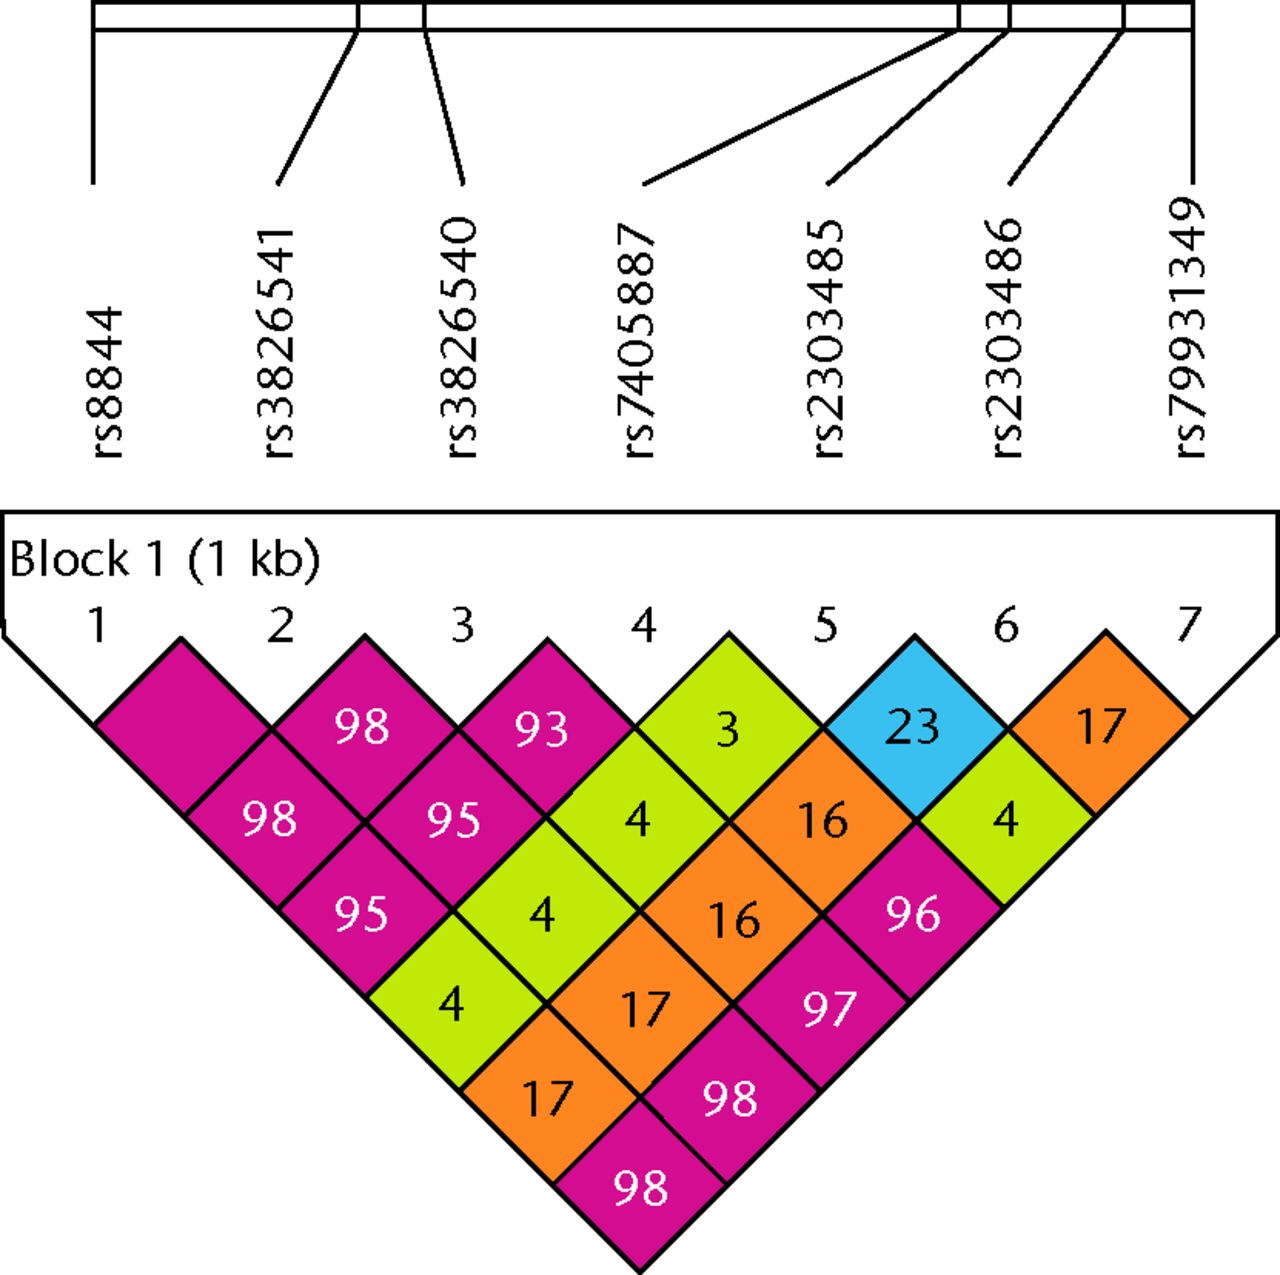 Fig. 1 
          LD plot of seven single nucleotide polymorphisms
(SNPs) in the 3’ UTR of HOXB9. r2values
that correspond to SNP pairs are expressed as percentages and shown
within the respective squares. Higher r2 values
are indicated in red. These five SNPs constitute a haplotype block
that spans the 3’ UTR of the HOXB9 gene.
        